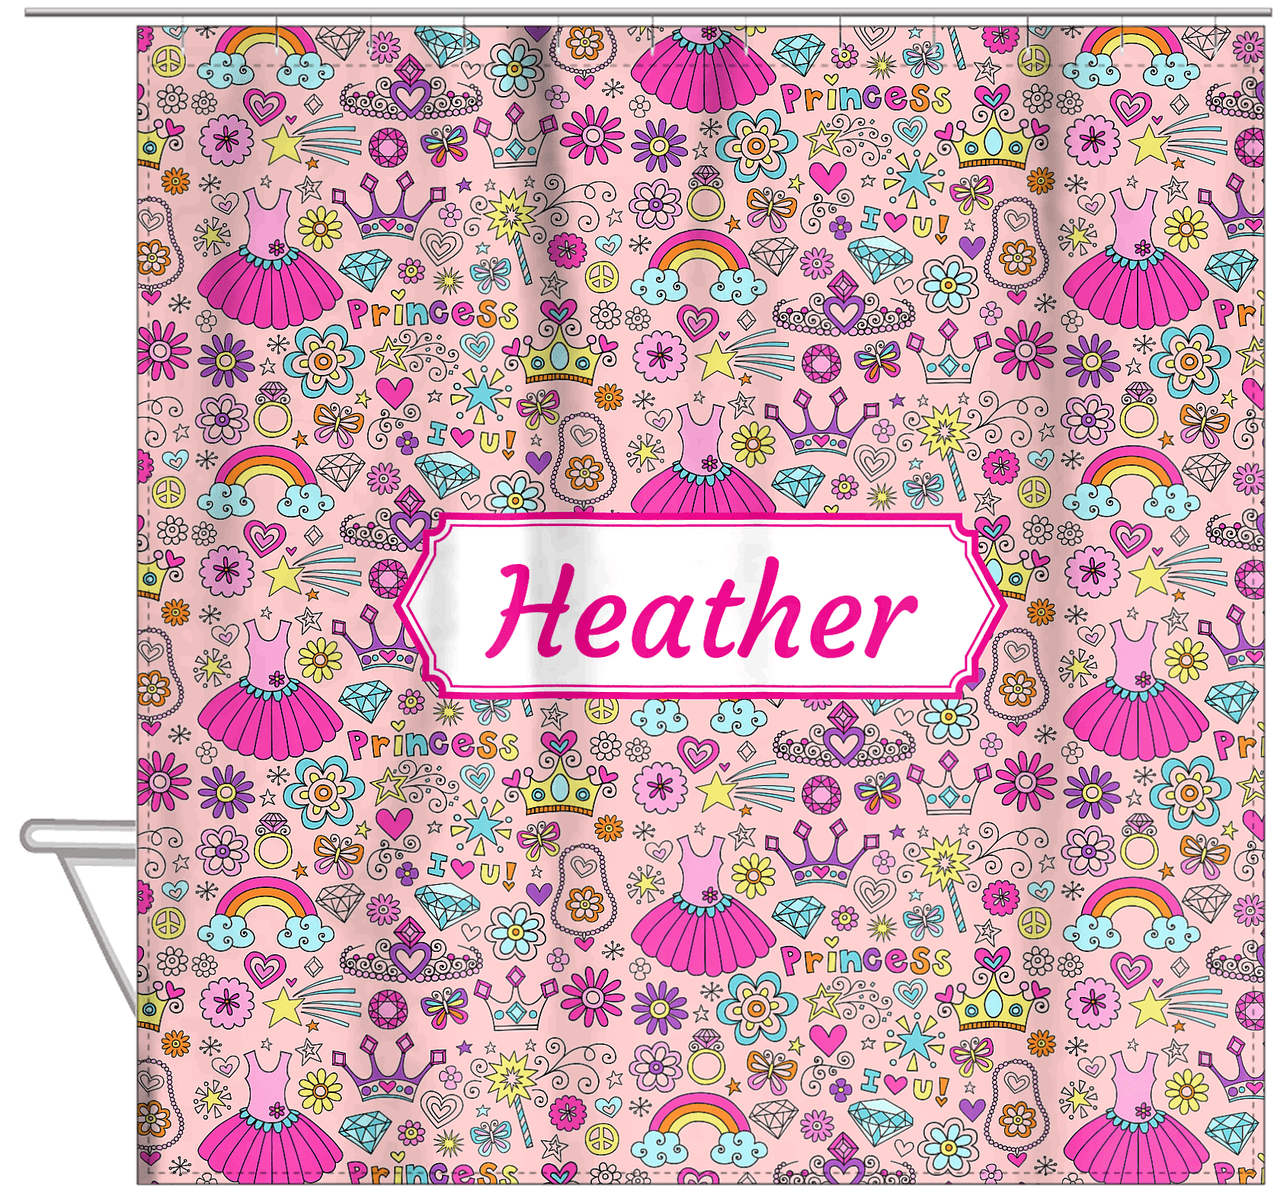 Personalized Princess Shower Curtain I - Pink Background - Decorative Rectangle Nameplate - Hanging View